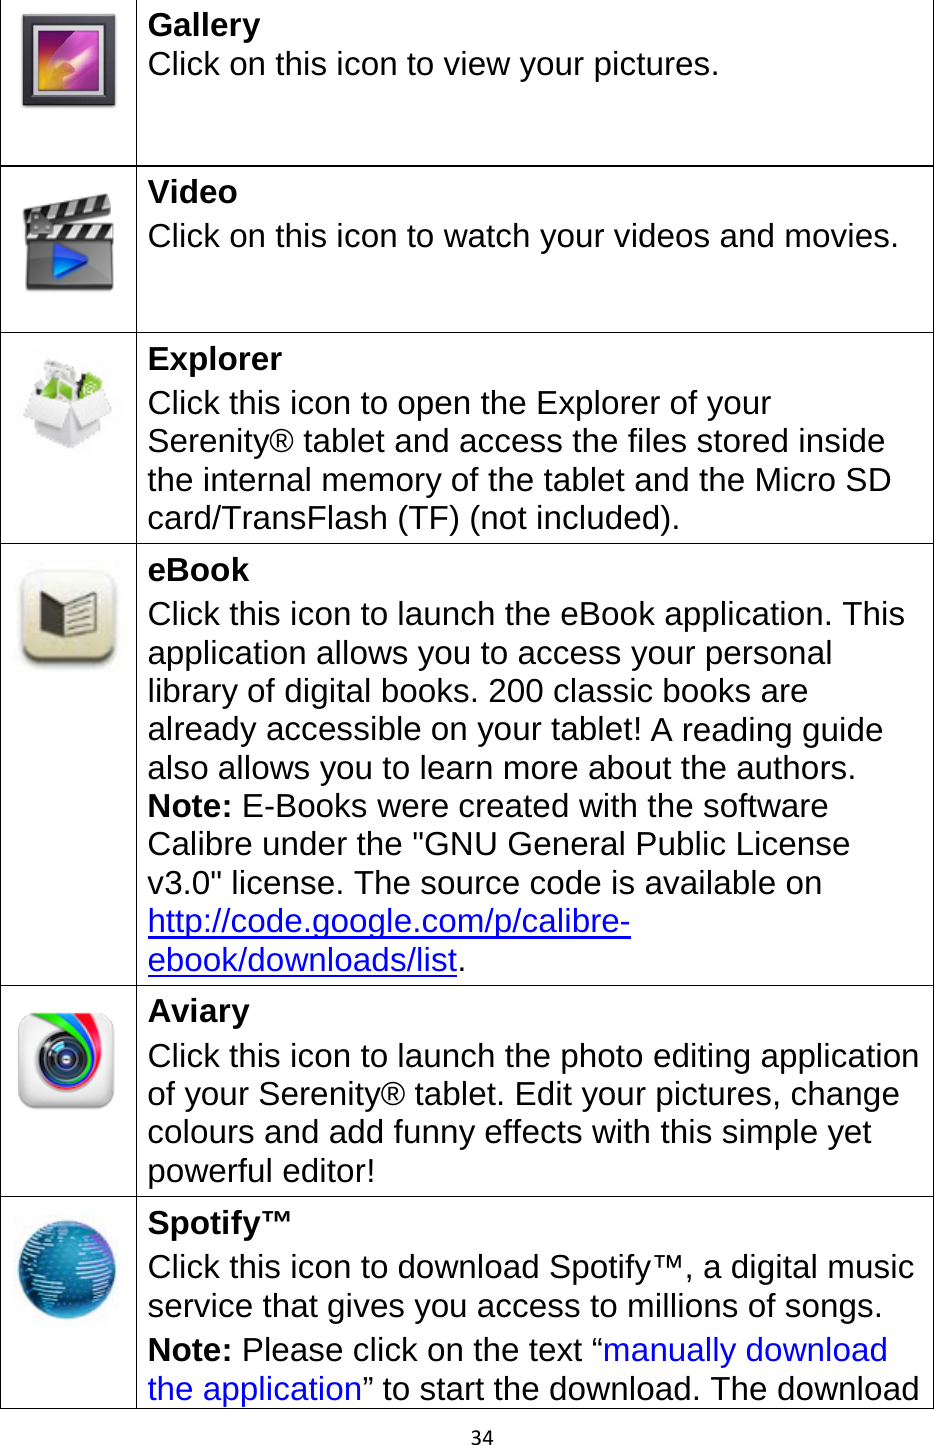 34   Gallery Click on this icon to view your pictures.  Video Click on this icon to watch your videos and movies.  Explorer Click this icon to open the Explorer of your Serenity® tablet and access the files stored inside the internal memory of the tablet and the Micro SD card/TransFlash (TF) (not included).  eBook Click this icon to launch the eBook application. This application allows you to access your personal library of digital books. 200 classic books are already accessible on your tablet! A reading guide also allows you to learn more about the authors. Note: E-Books were created with the software Calibre under the &quot;GNU General Public License v3.0&quot; license. The source code is available on http://code.google.com/p/calibre-ebook/downloads/list.  Aviary Click this icon to launch the photo editing application of your Serenity® tablet. Edit your pictures, change colours and add funny effects with this simple yet powerful editor!  Spotify™ Click this icon to download Spotify™, a digital music service that gives you access to millions of songs. Note: Please click on the text “manually download the application” to start the download. The download 